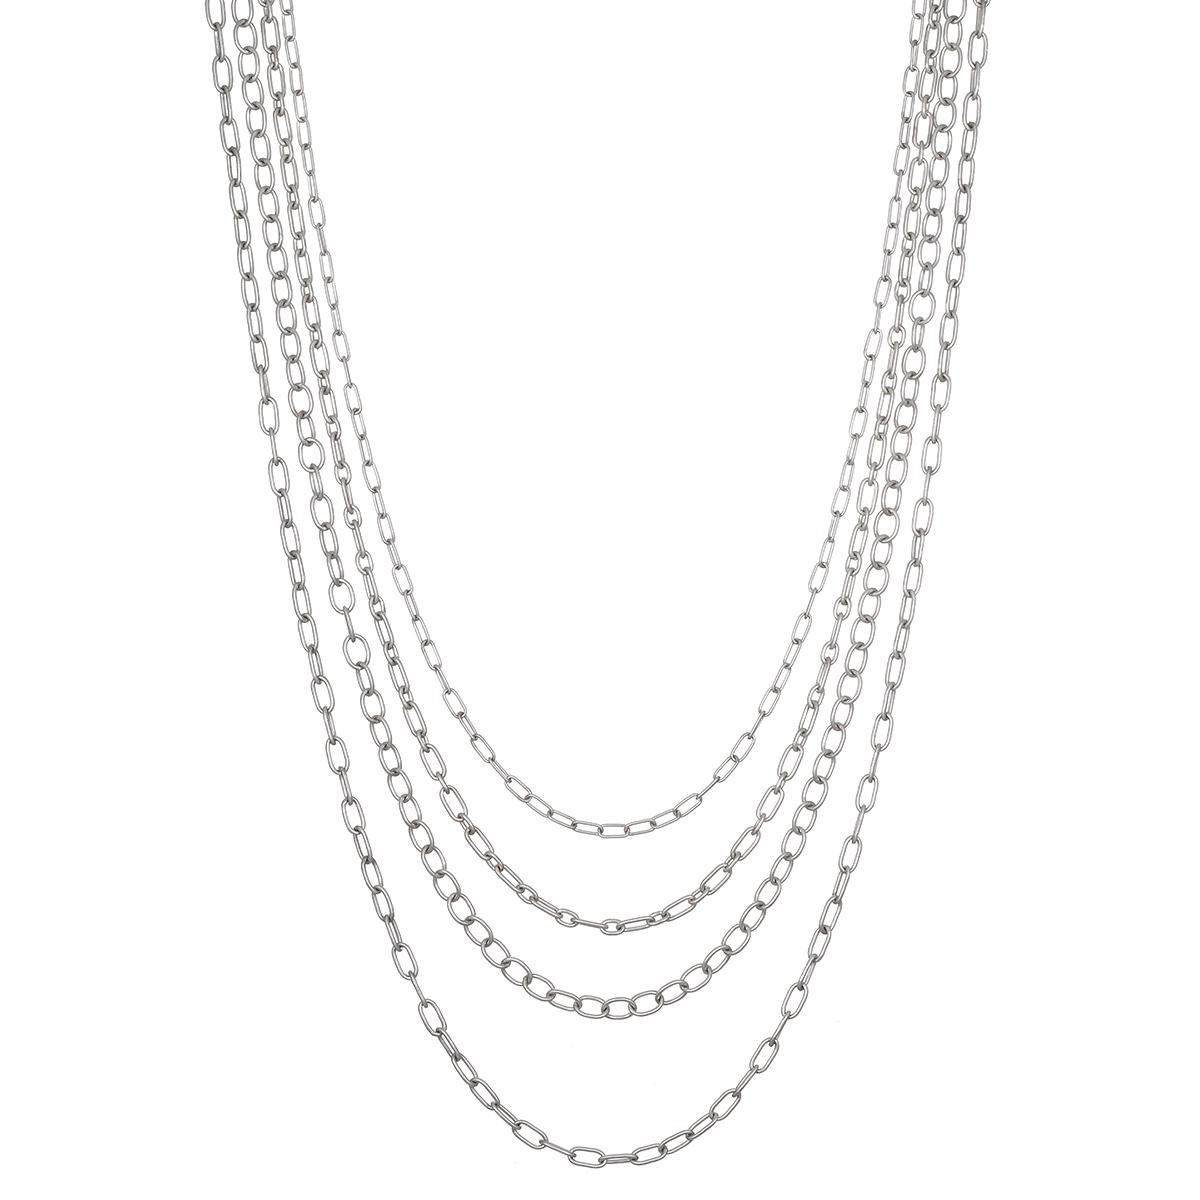 Classic and versatile, Faye Kim's Platinum Oval Link Chain is a perfect blend of modern and classic style...a must have for every jewelry wardrobe. This versatile piece, with its understated elegance, can be worn alone or as a layering piece with